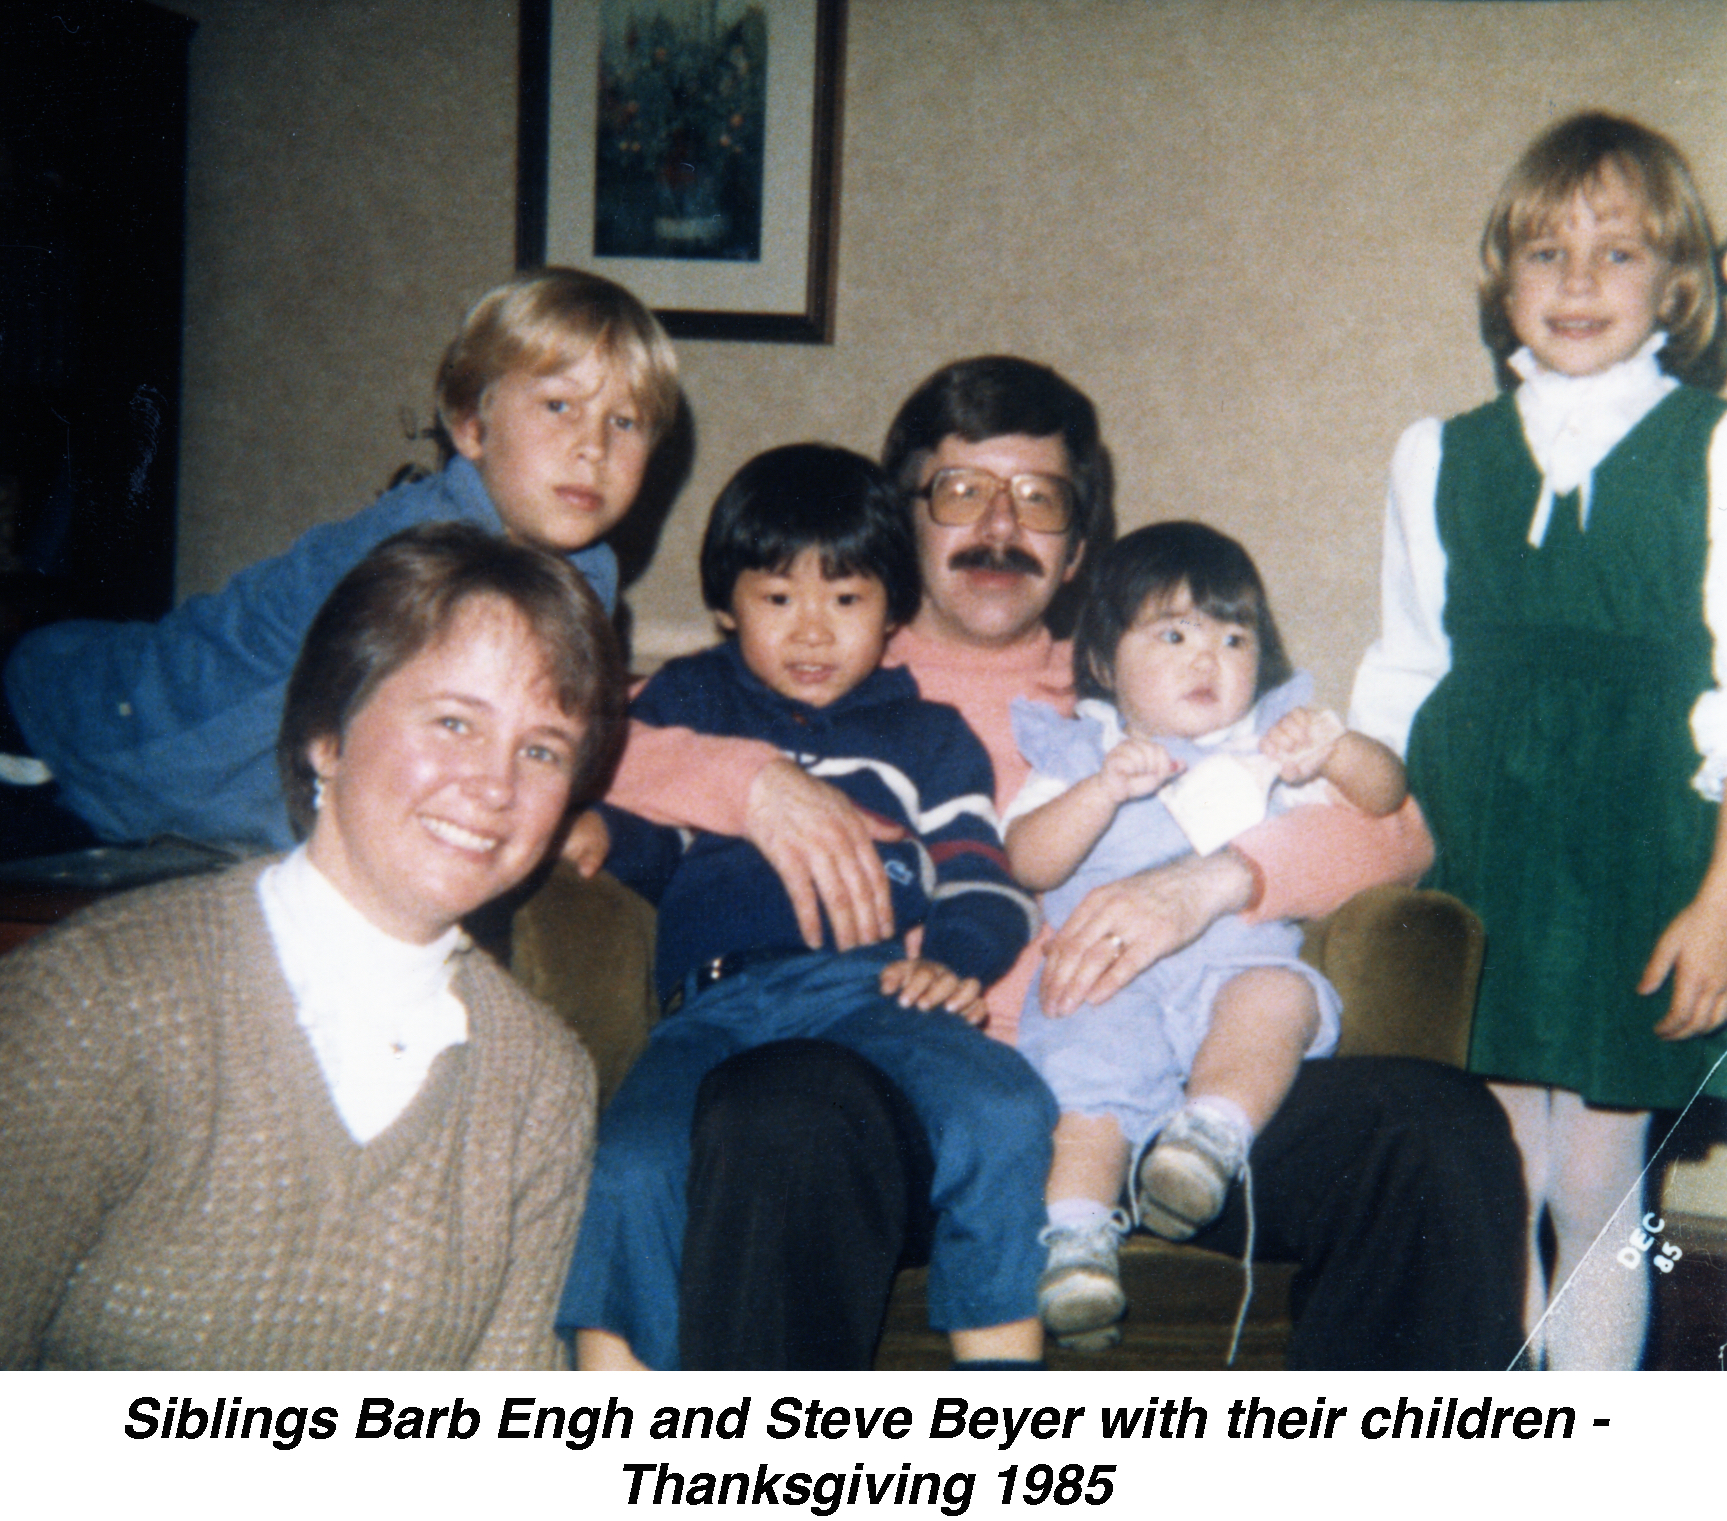 Siblings Barb and Steve are clustered with their children